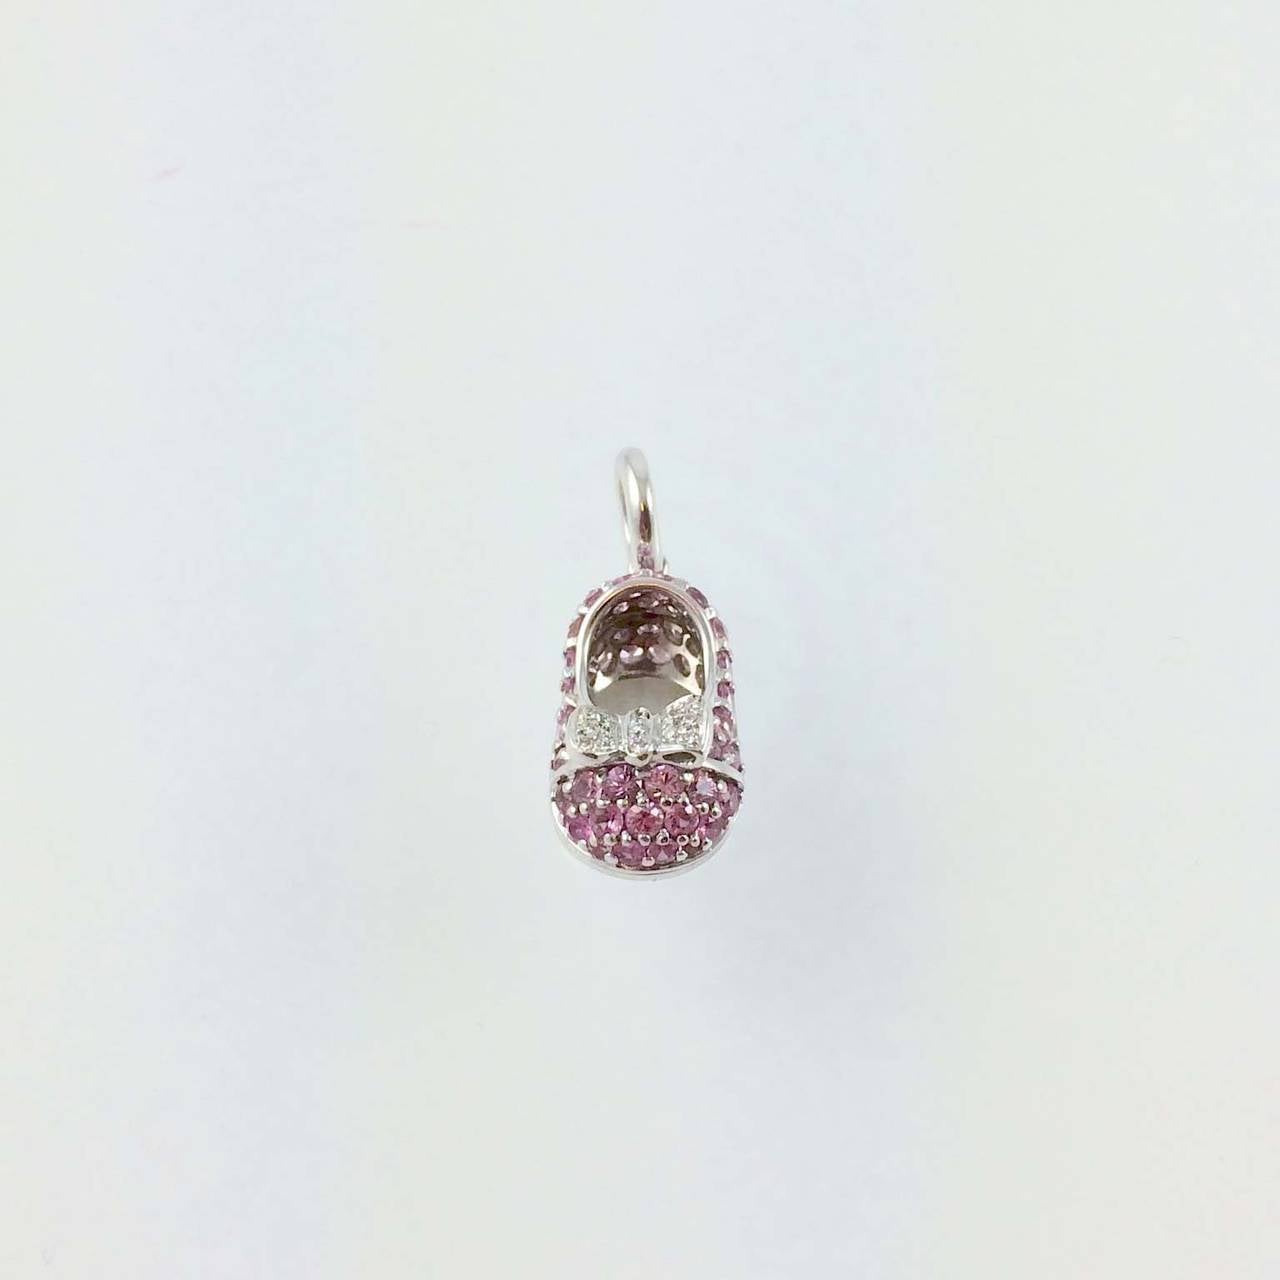 Aaron Basha 18K white gold, prong set with pink sapphires and diamond bow pave set with full cut round diamonds, G color, VS clarity suspended from 18K white gold bale.
Retail $4600